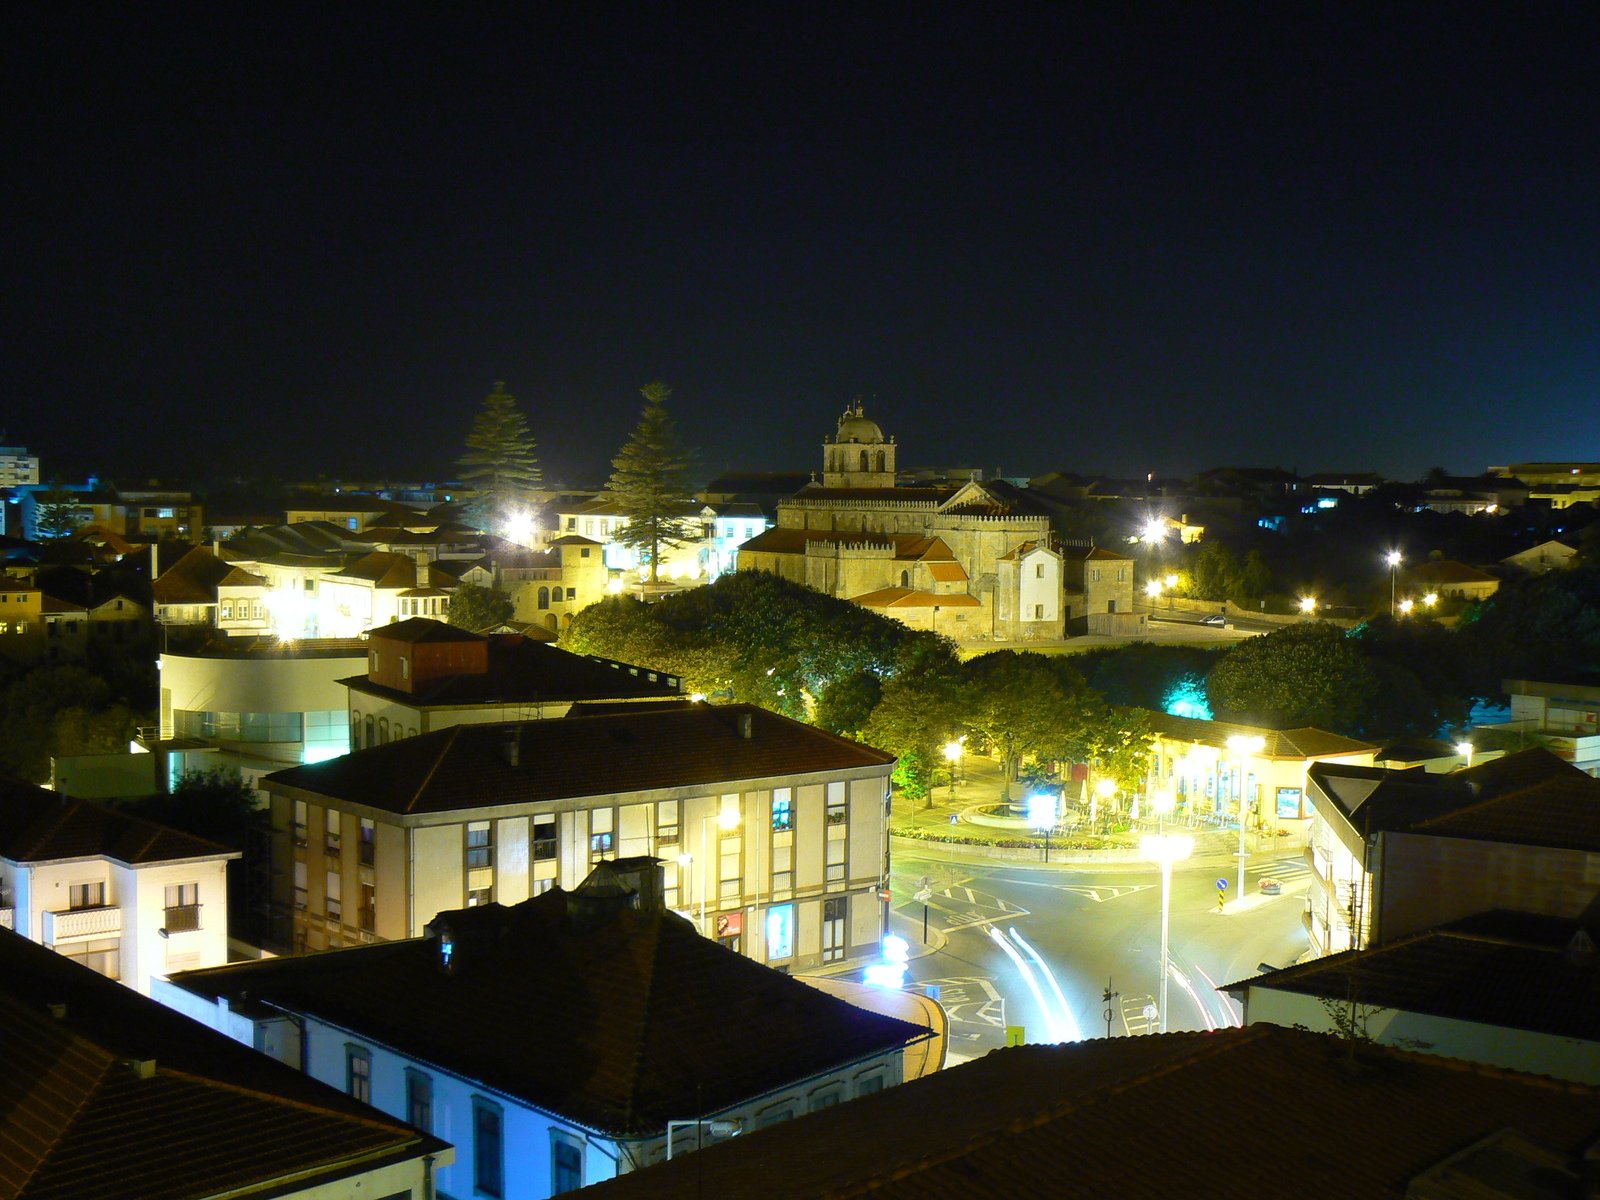 a night time city view shows a small town and a church